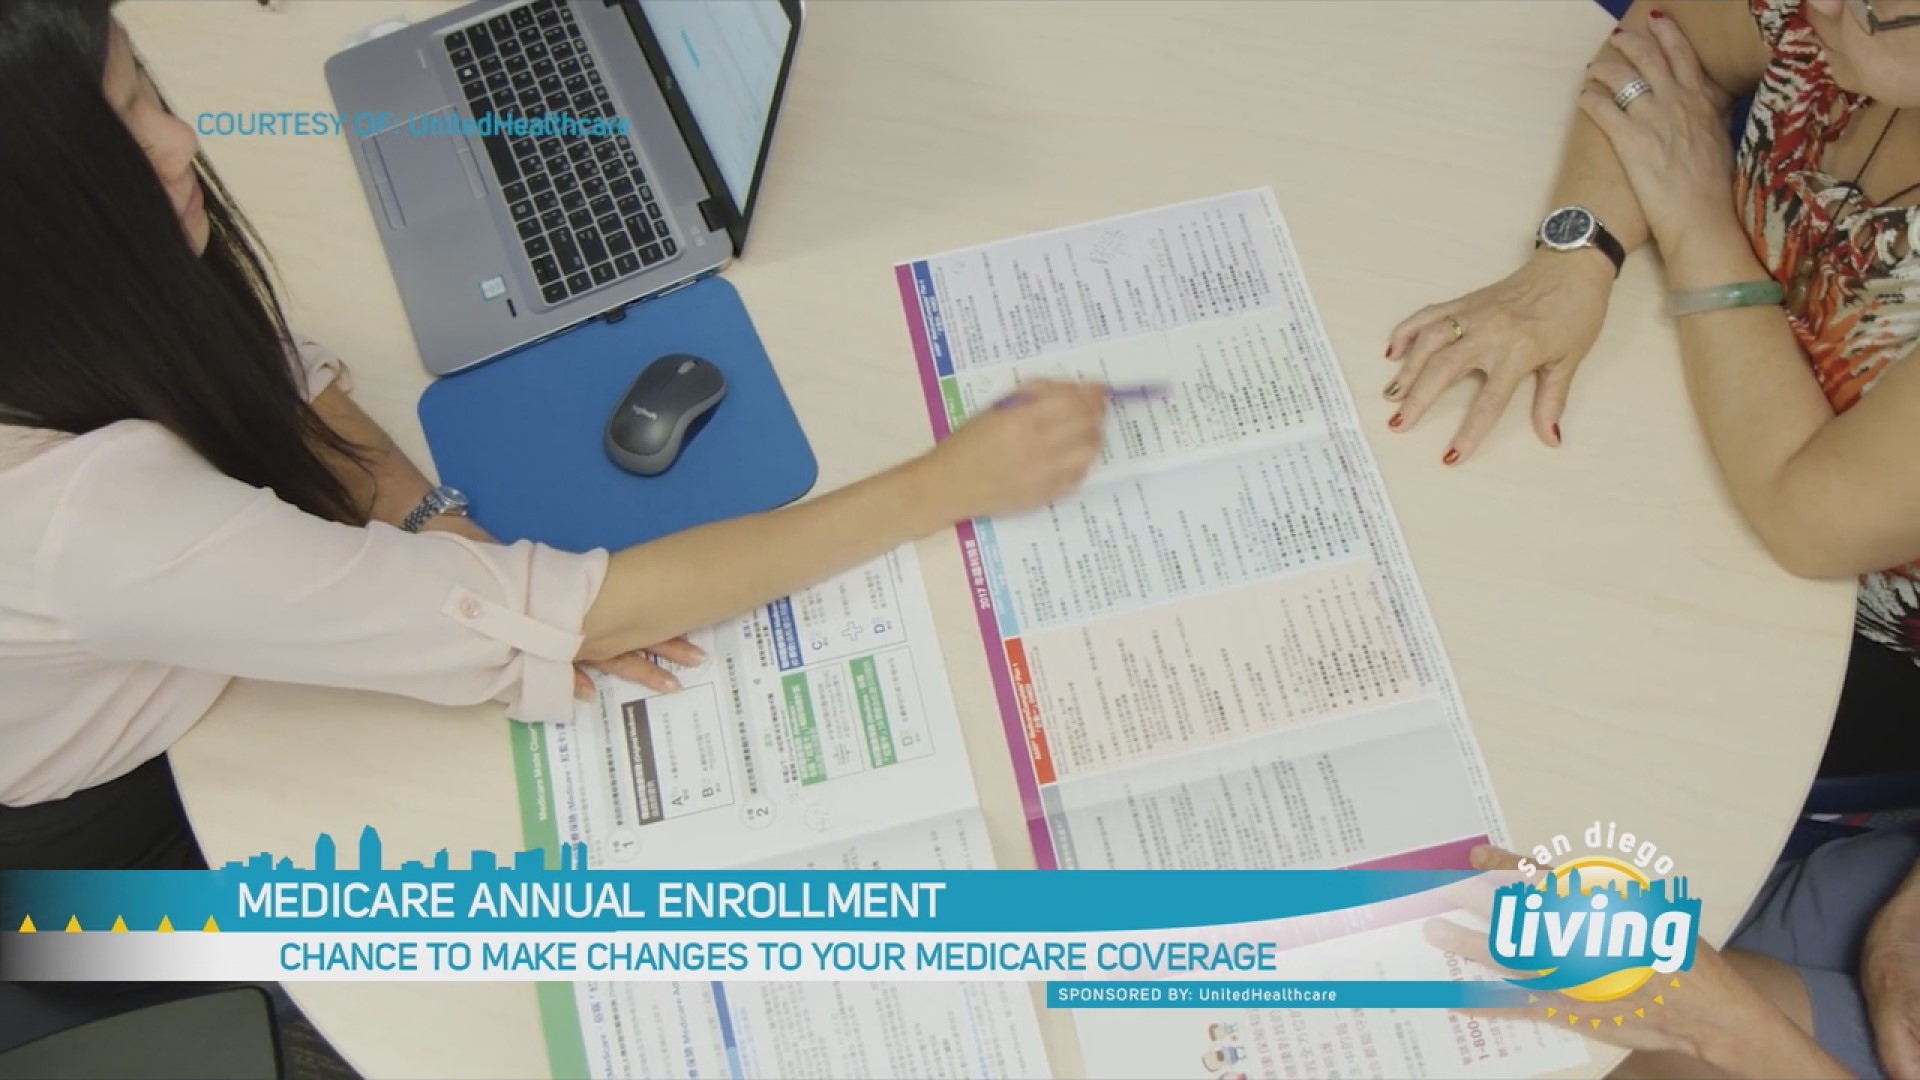 How to save more money and get more benefits during open enrollment. Sponsored by: UnitedHealthcare